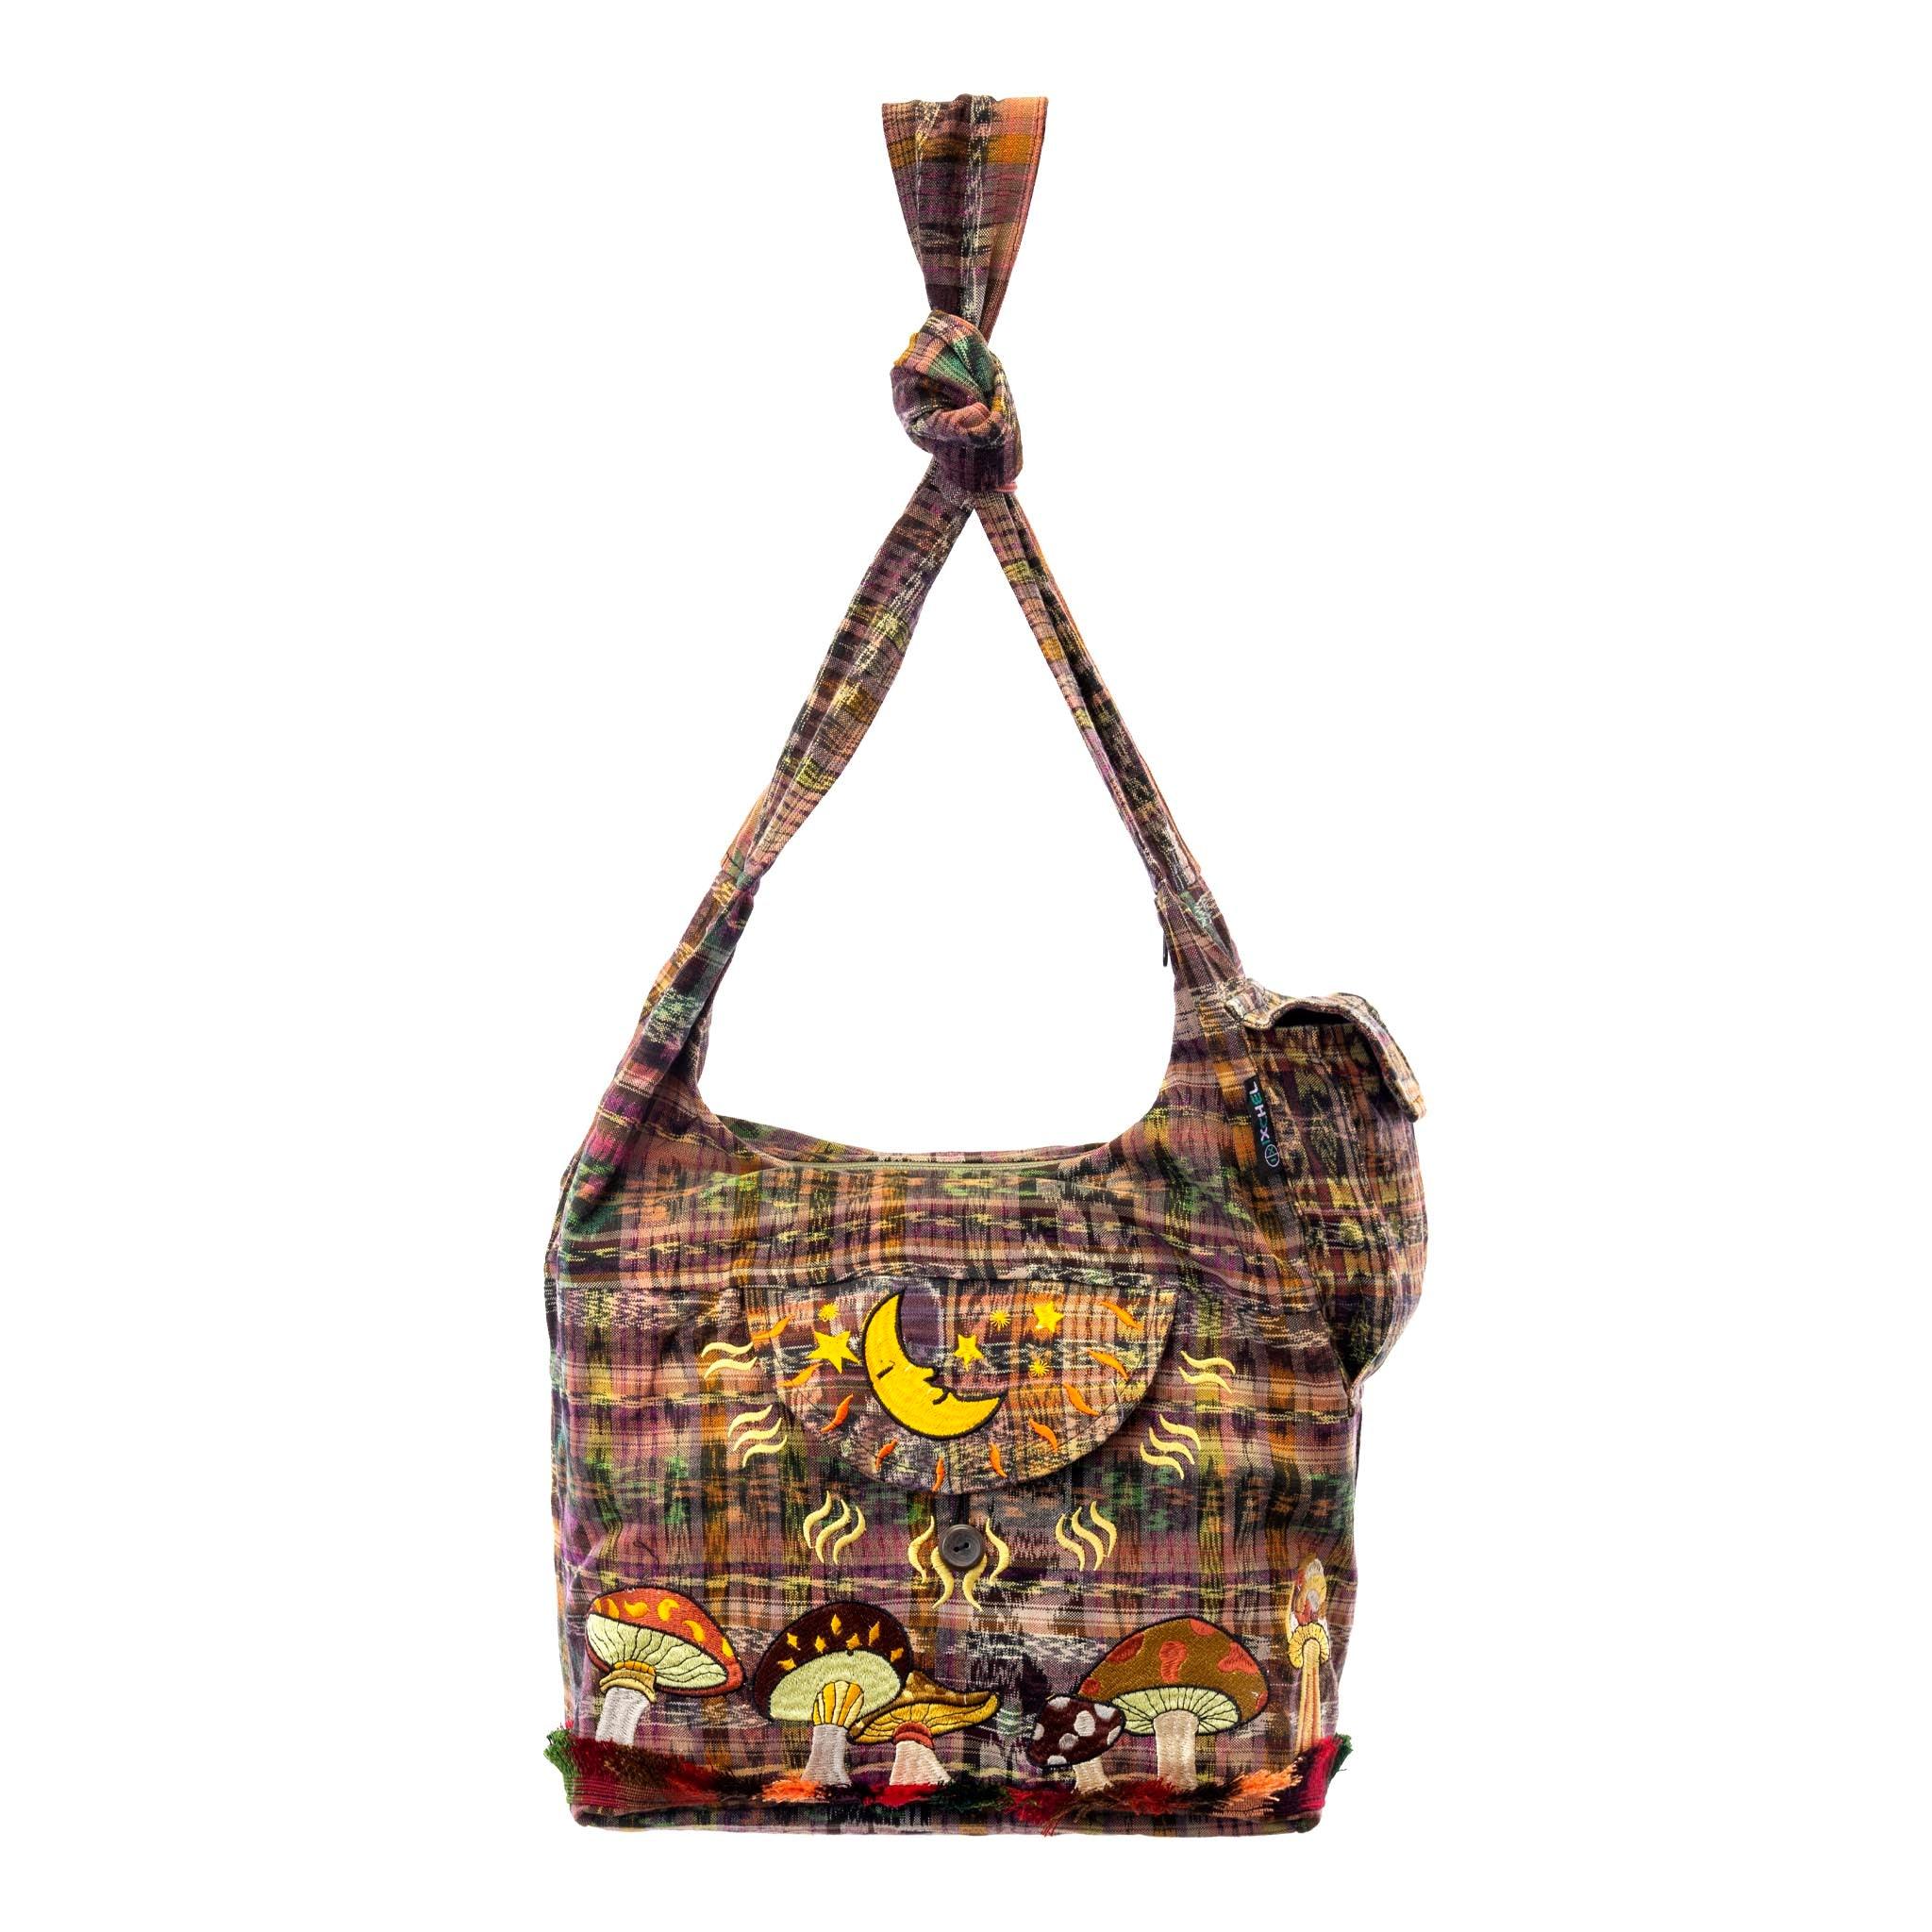 Hippie Cotton Shoulder Bag with Patchwork and Embroidery | Purses-Bags |  Green | Patchwork, Embroidered, Pocket, Yoga, Vacation, Bohemian, Handmade